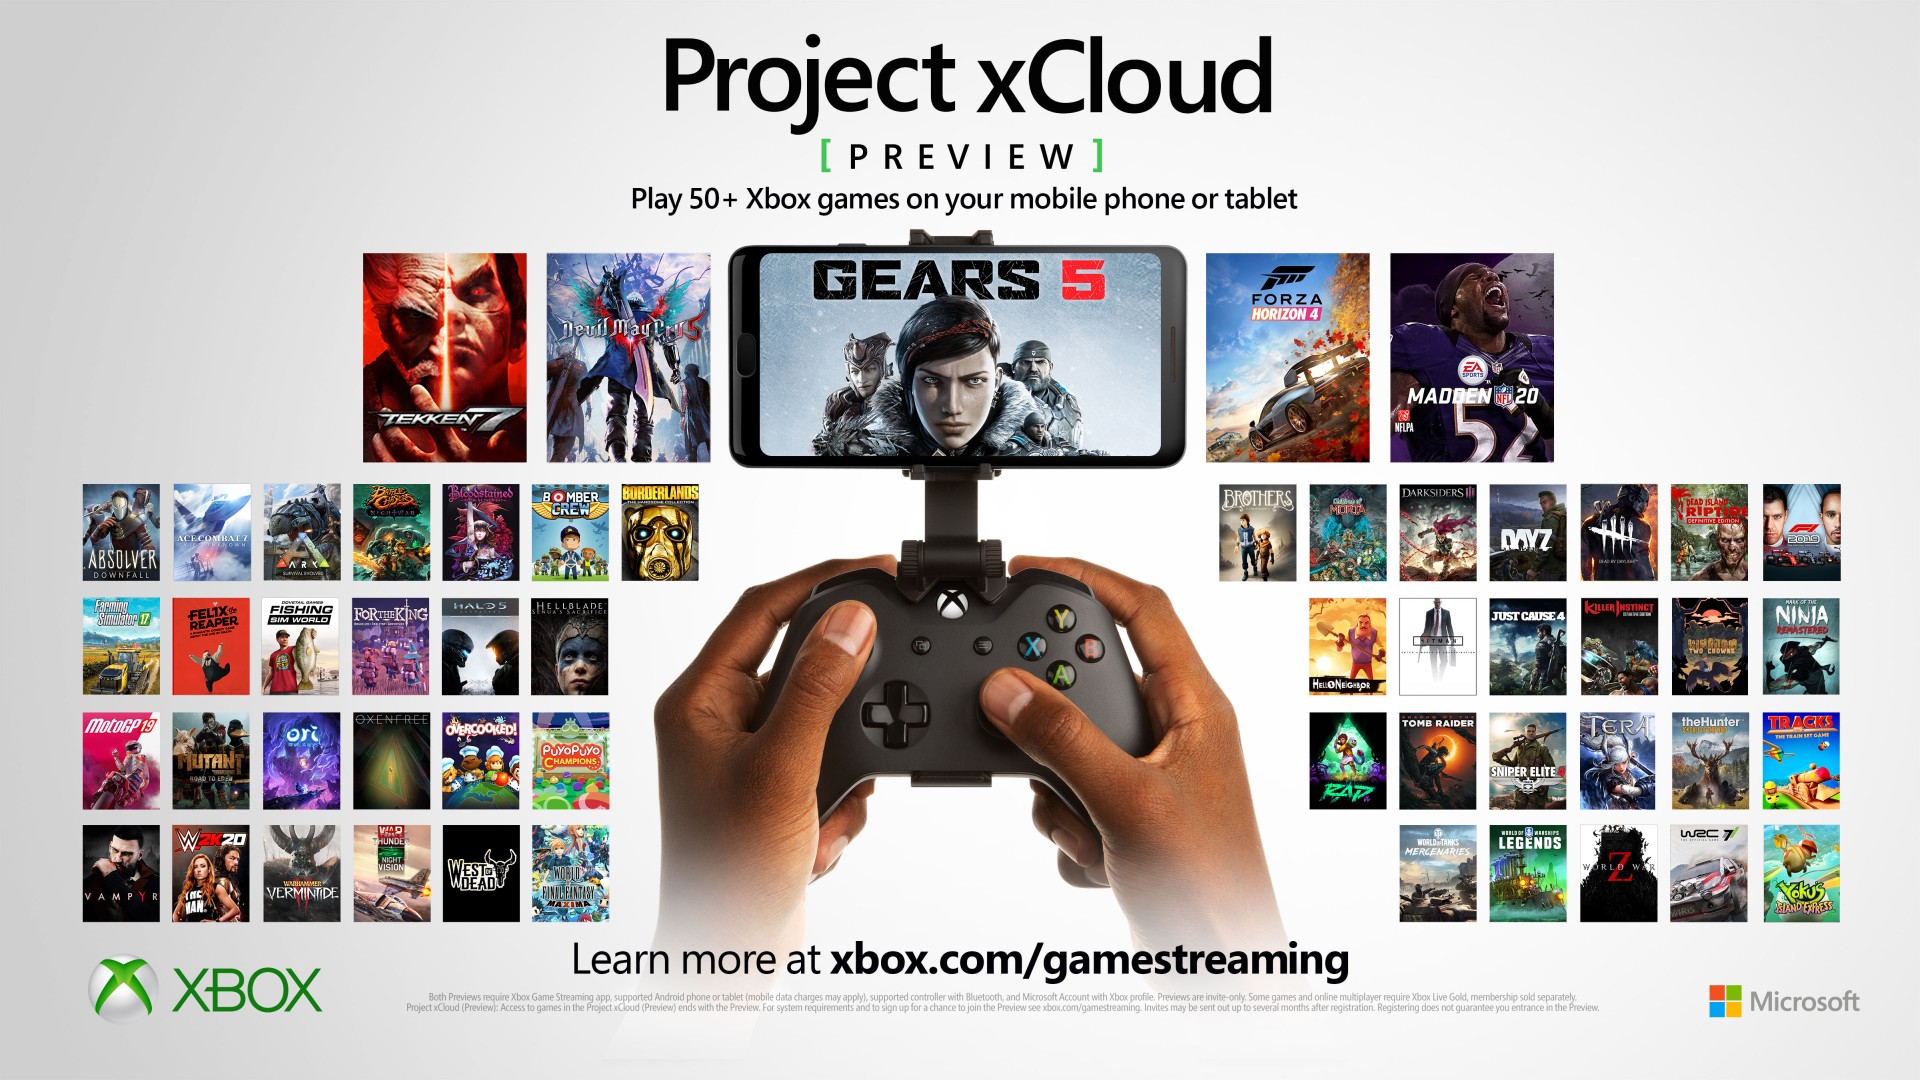 X019: Expanding Project xCloud with More Games, More Ways to Play, and More  Players - Xbox Wire